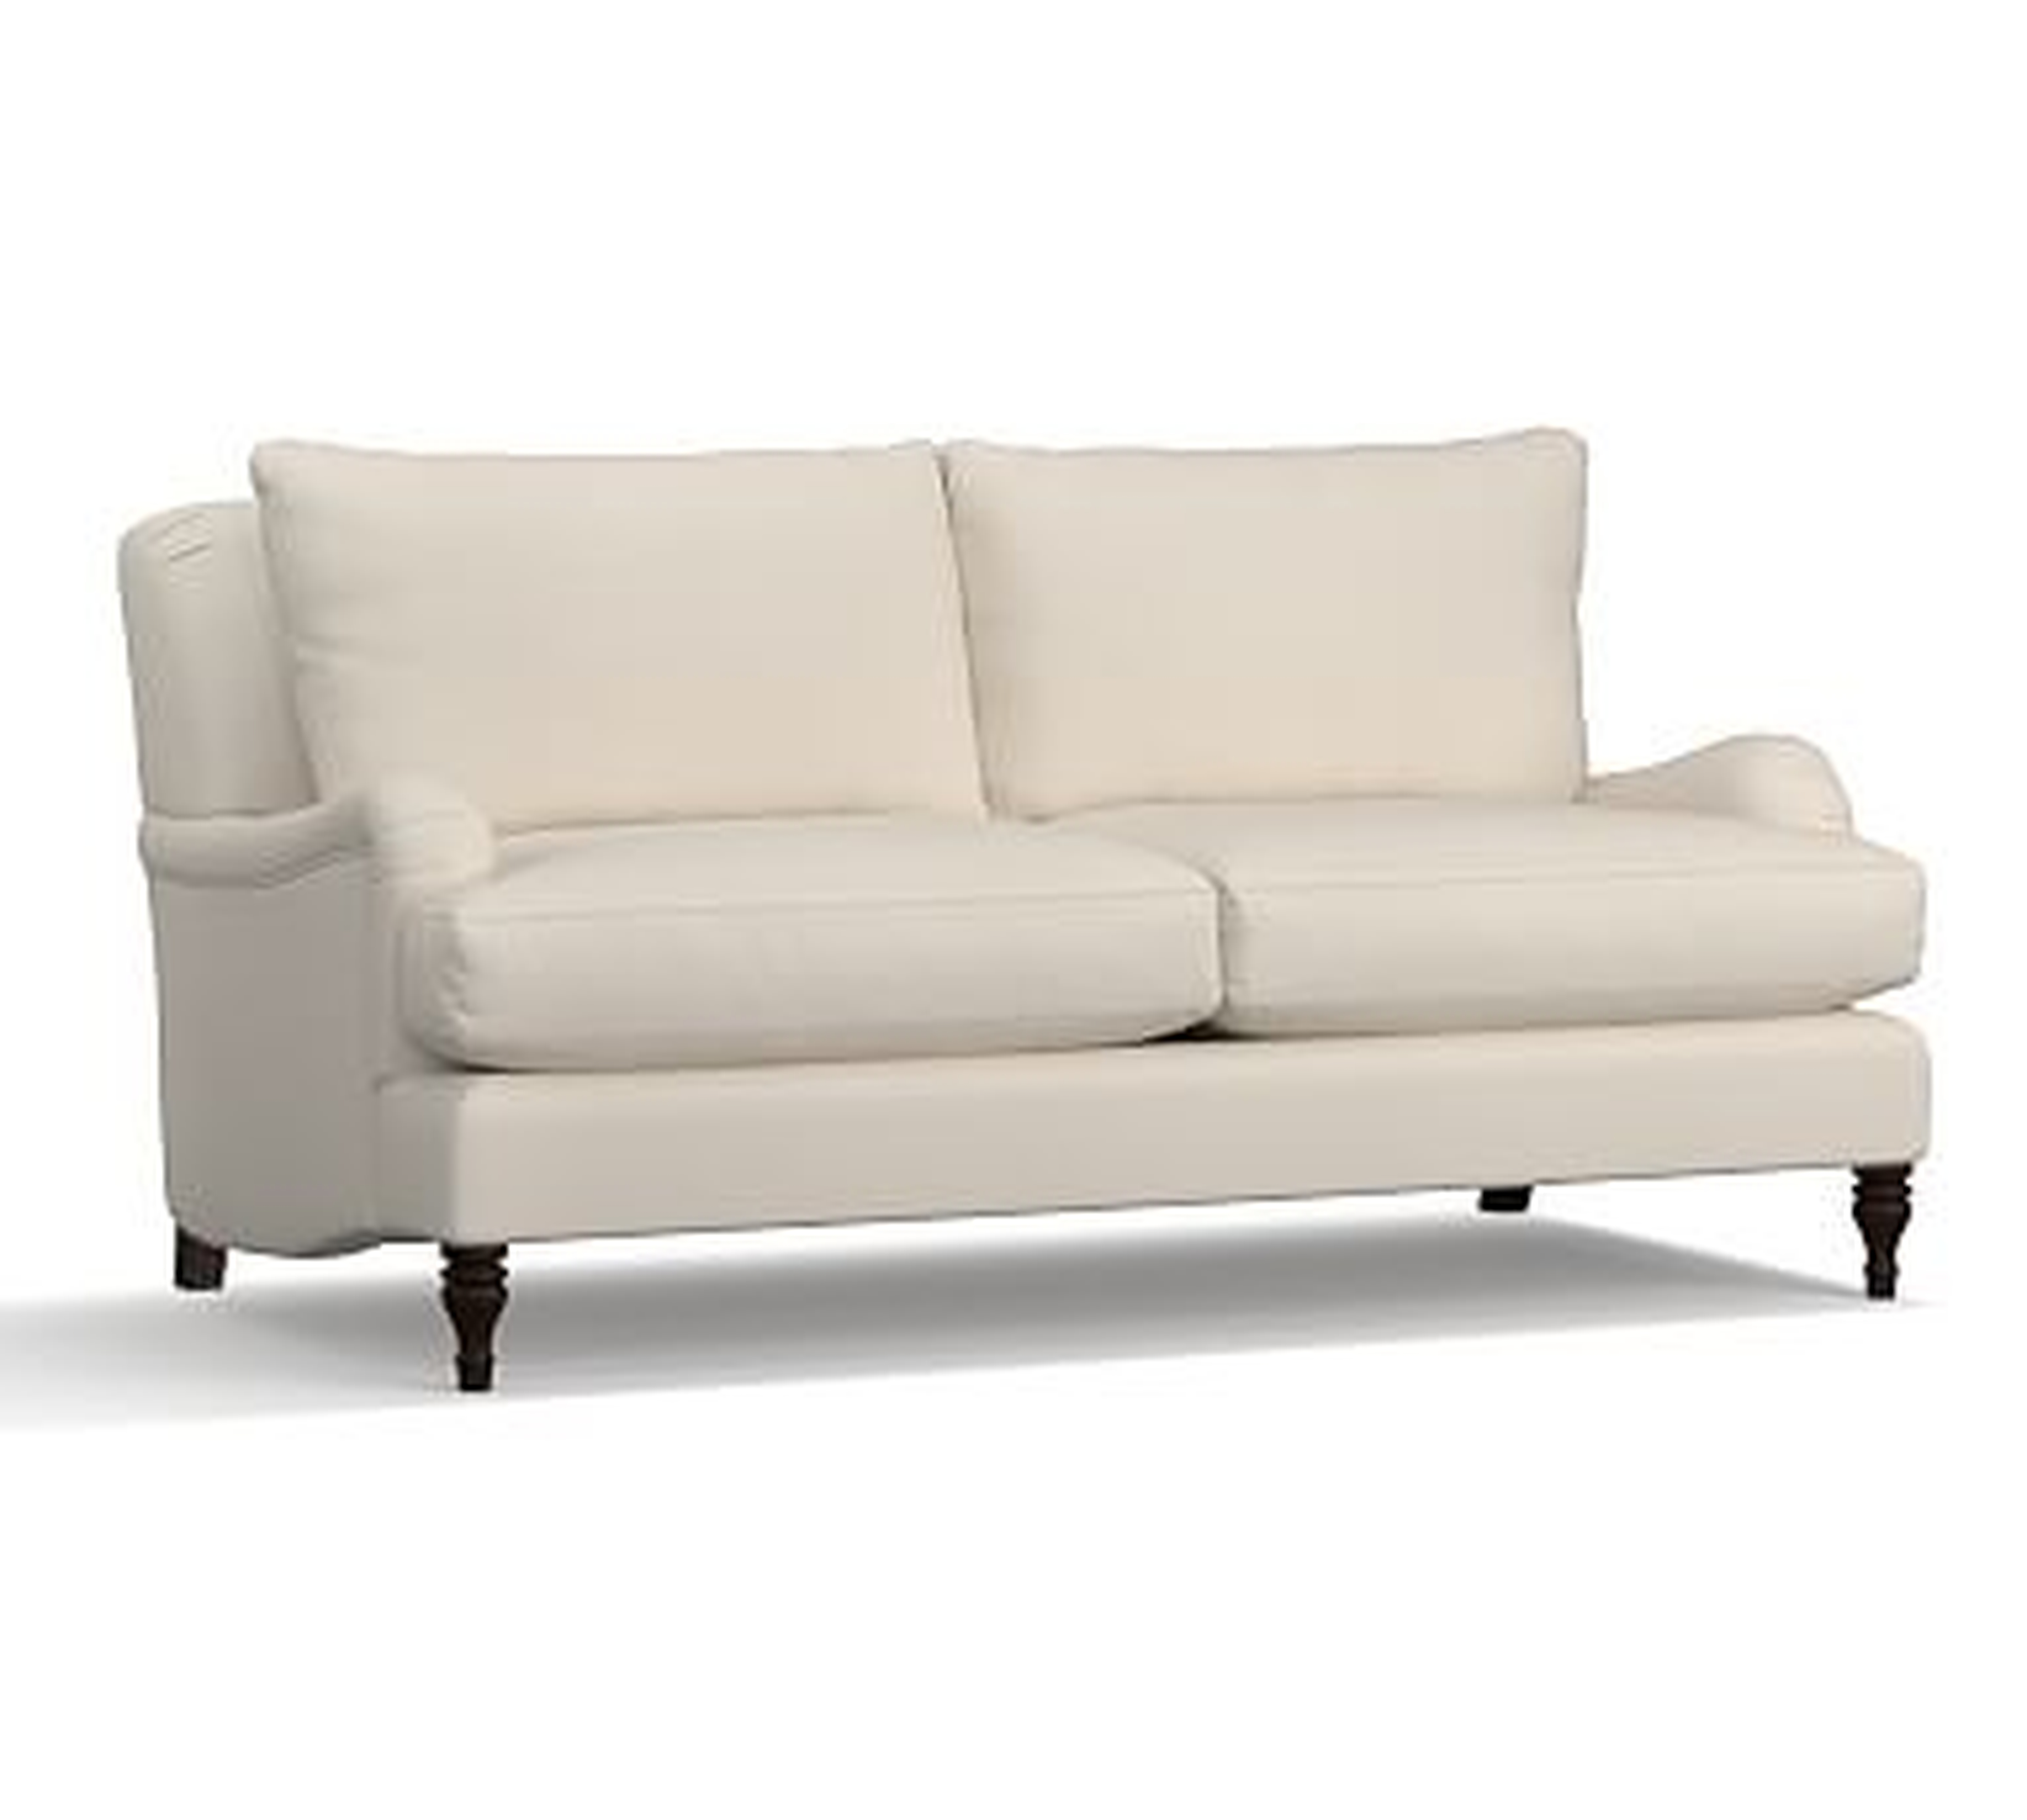 Carlisle Upholstered Loveseat 70", Polyester Wrapped Cushions, Twill Cream - Pottery Barn